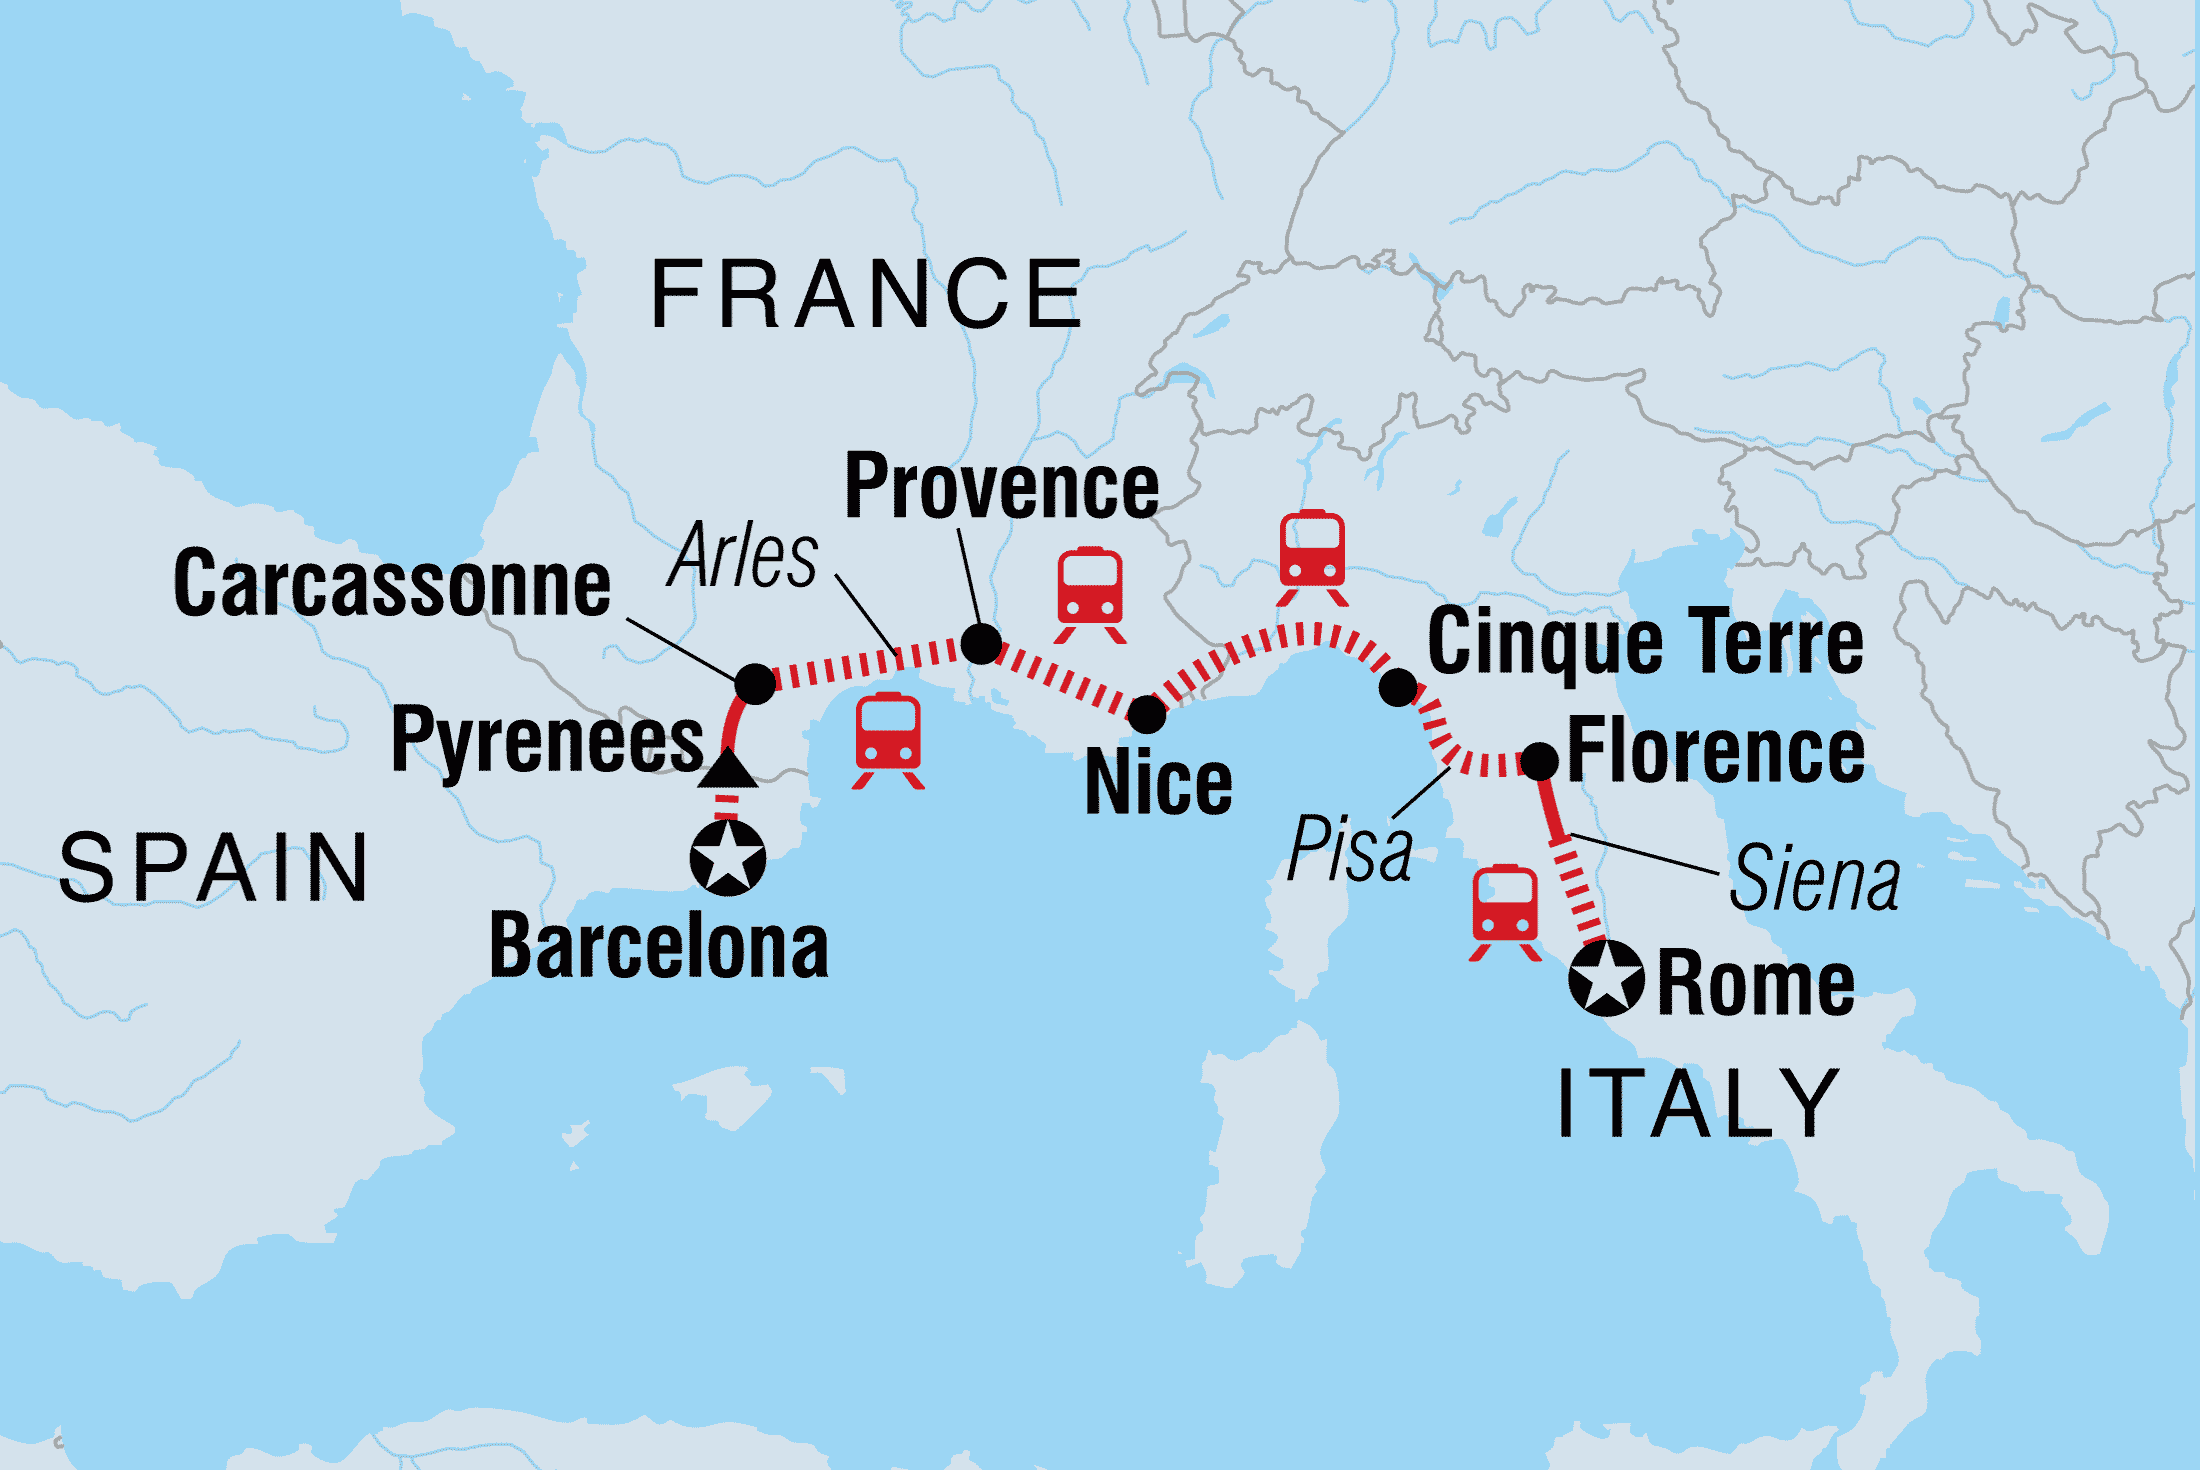 Map of Barcelona to Rome including France, Italy and Spain